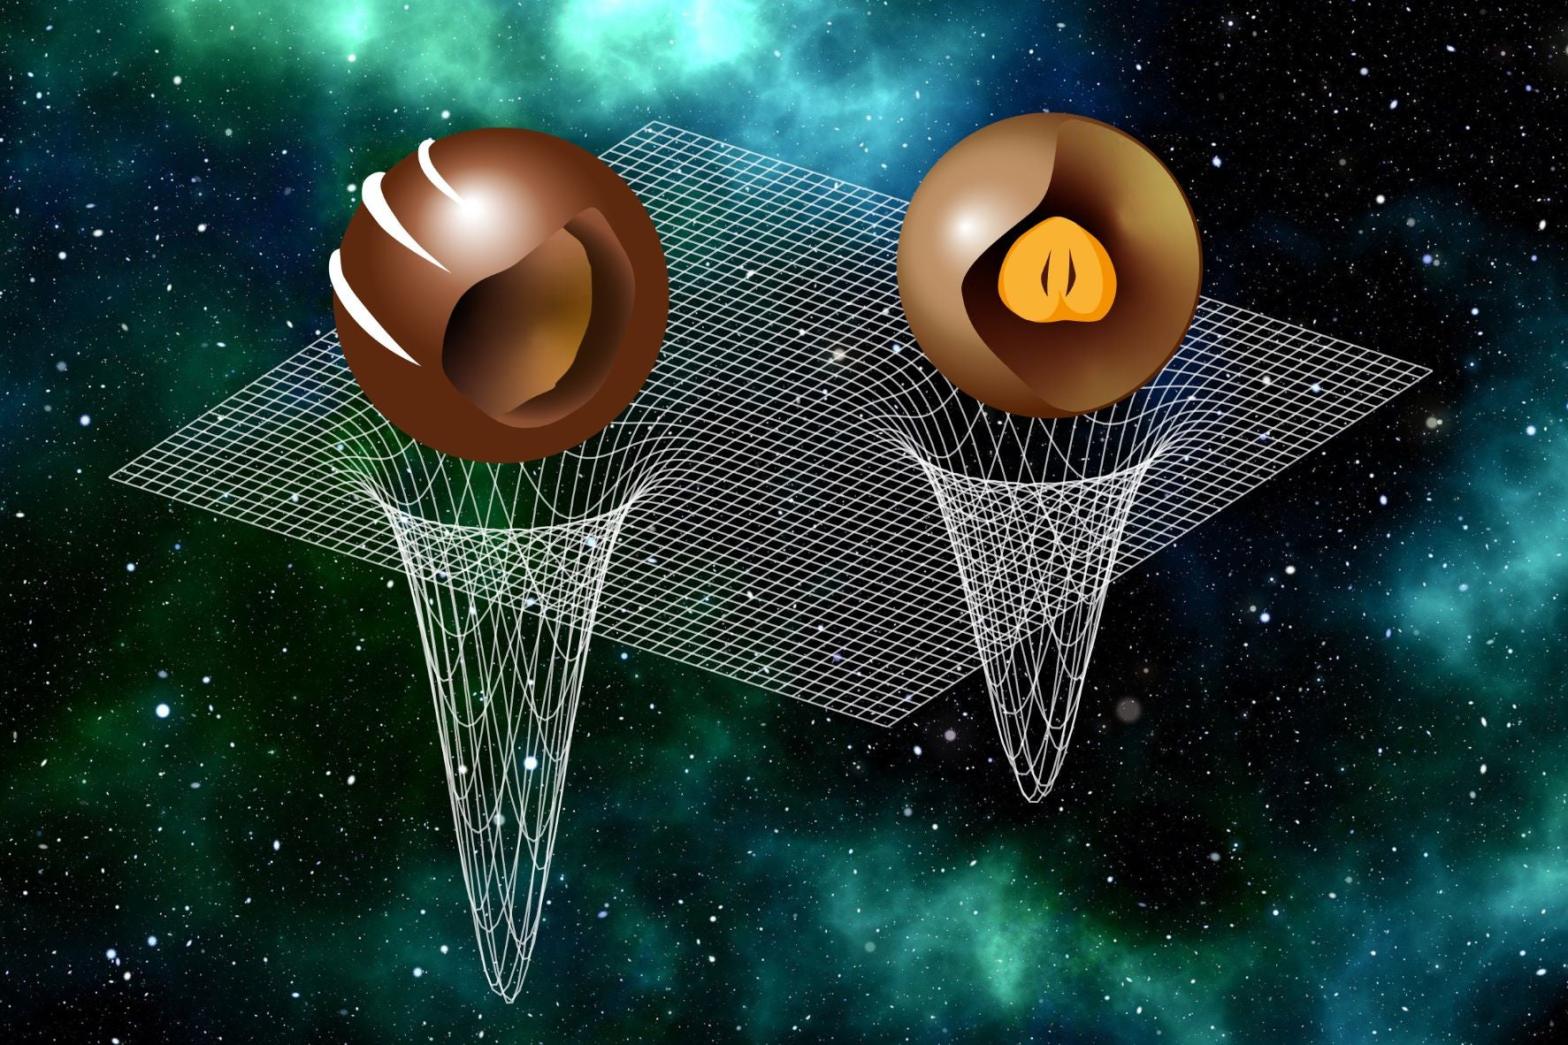 An illustration showing the internal workings of heavier (left) and lighter (right) neutron stars, imagined as pralines. (Illustration: Peter Kiefer & Luciano Rezzolla)